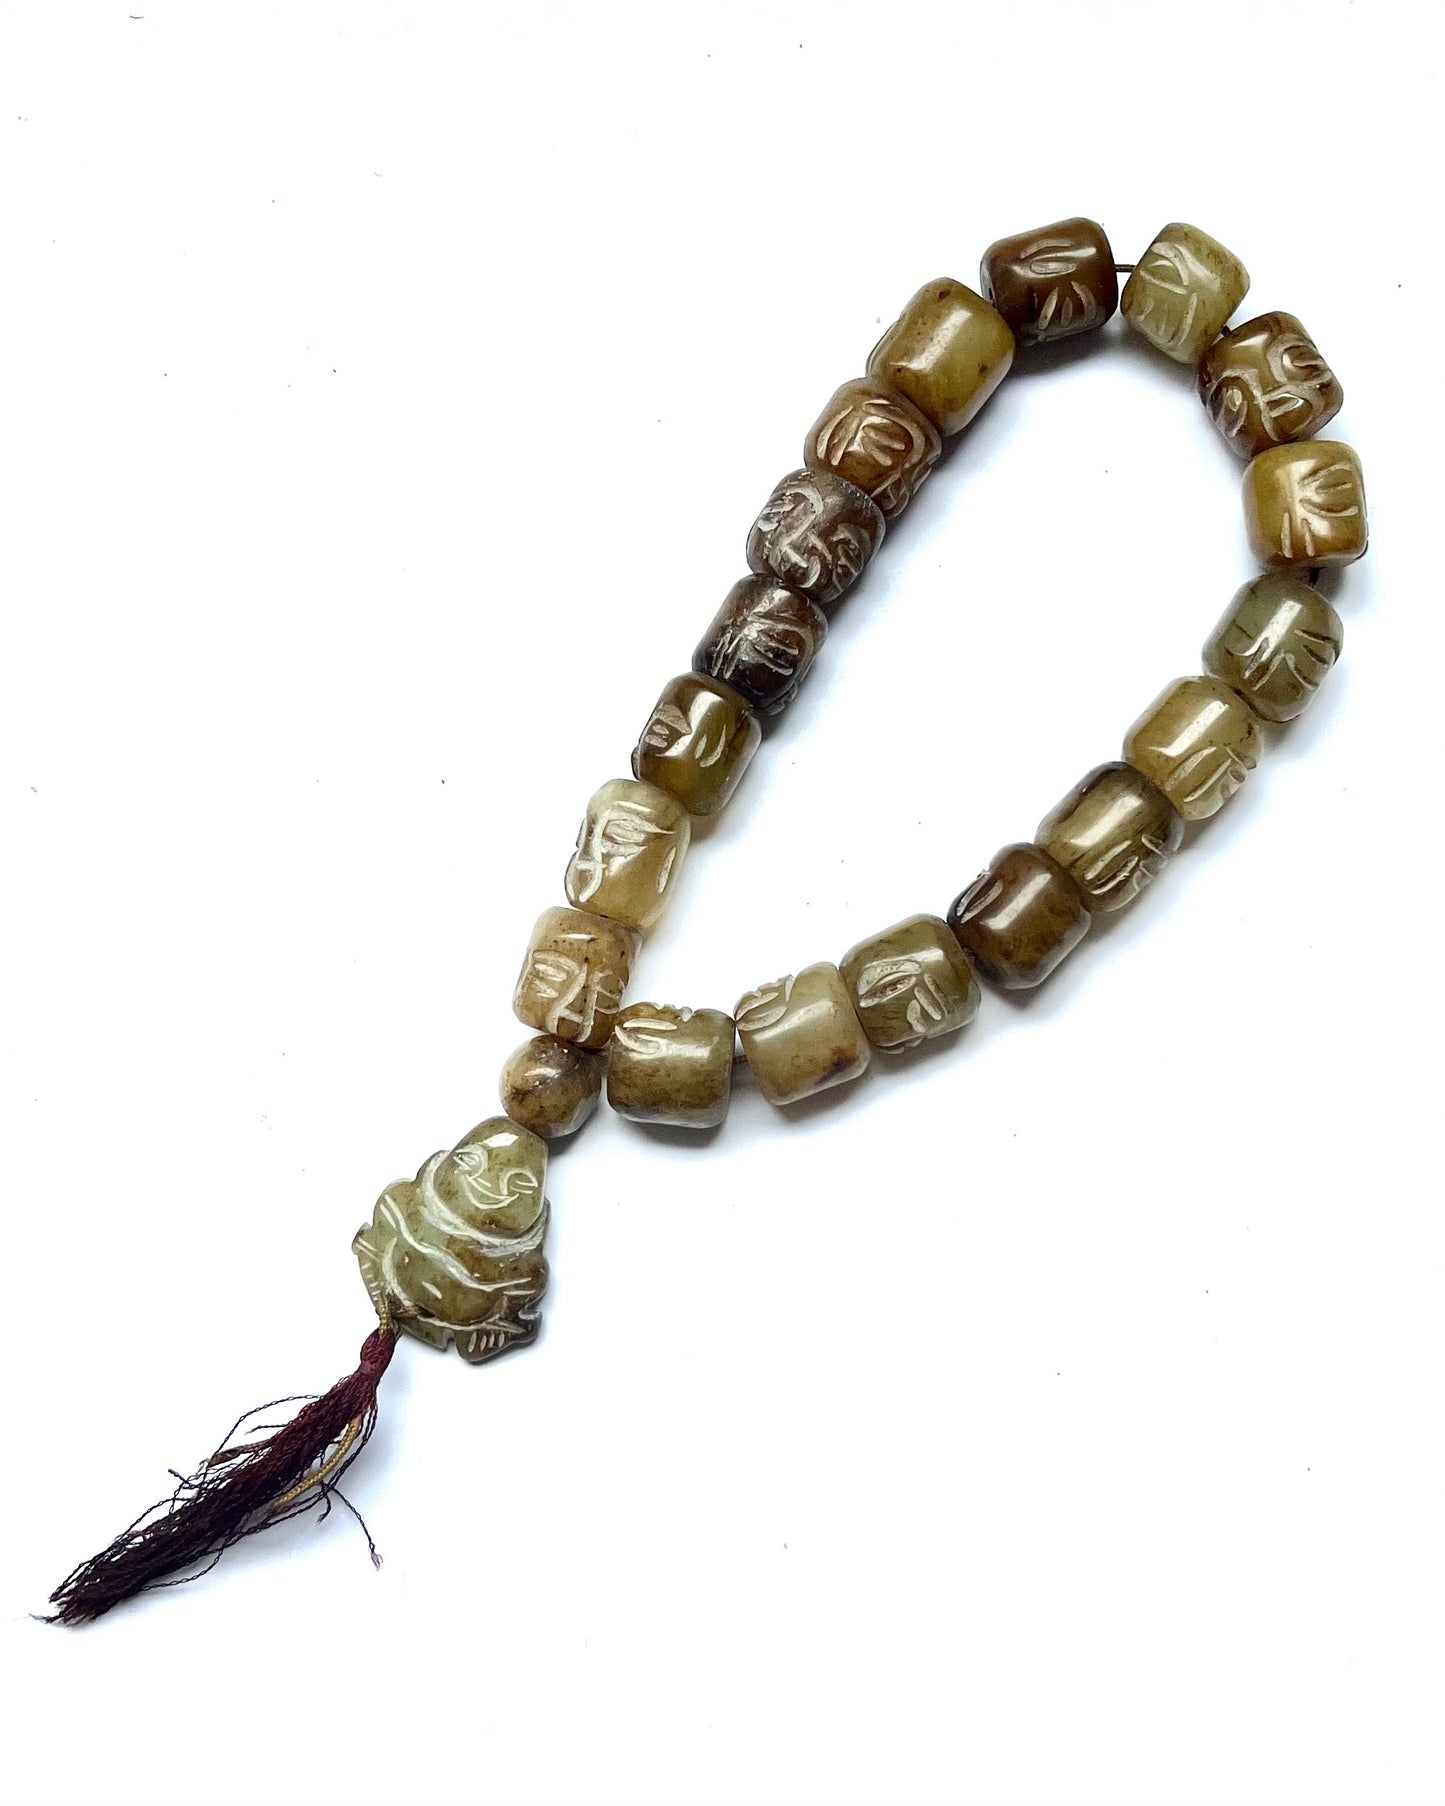 Vintage 20th century strand of green hardstone worry beads, face beads and Buddha plaque.